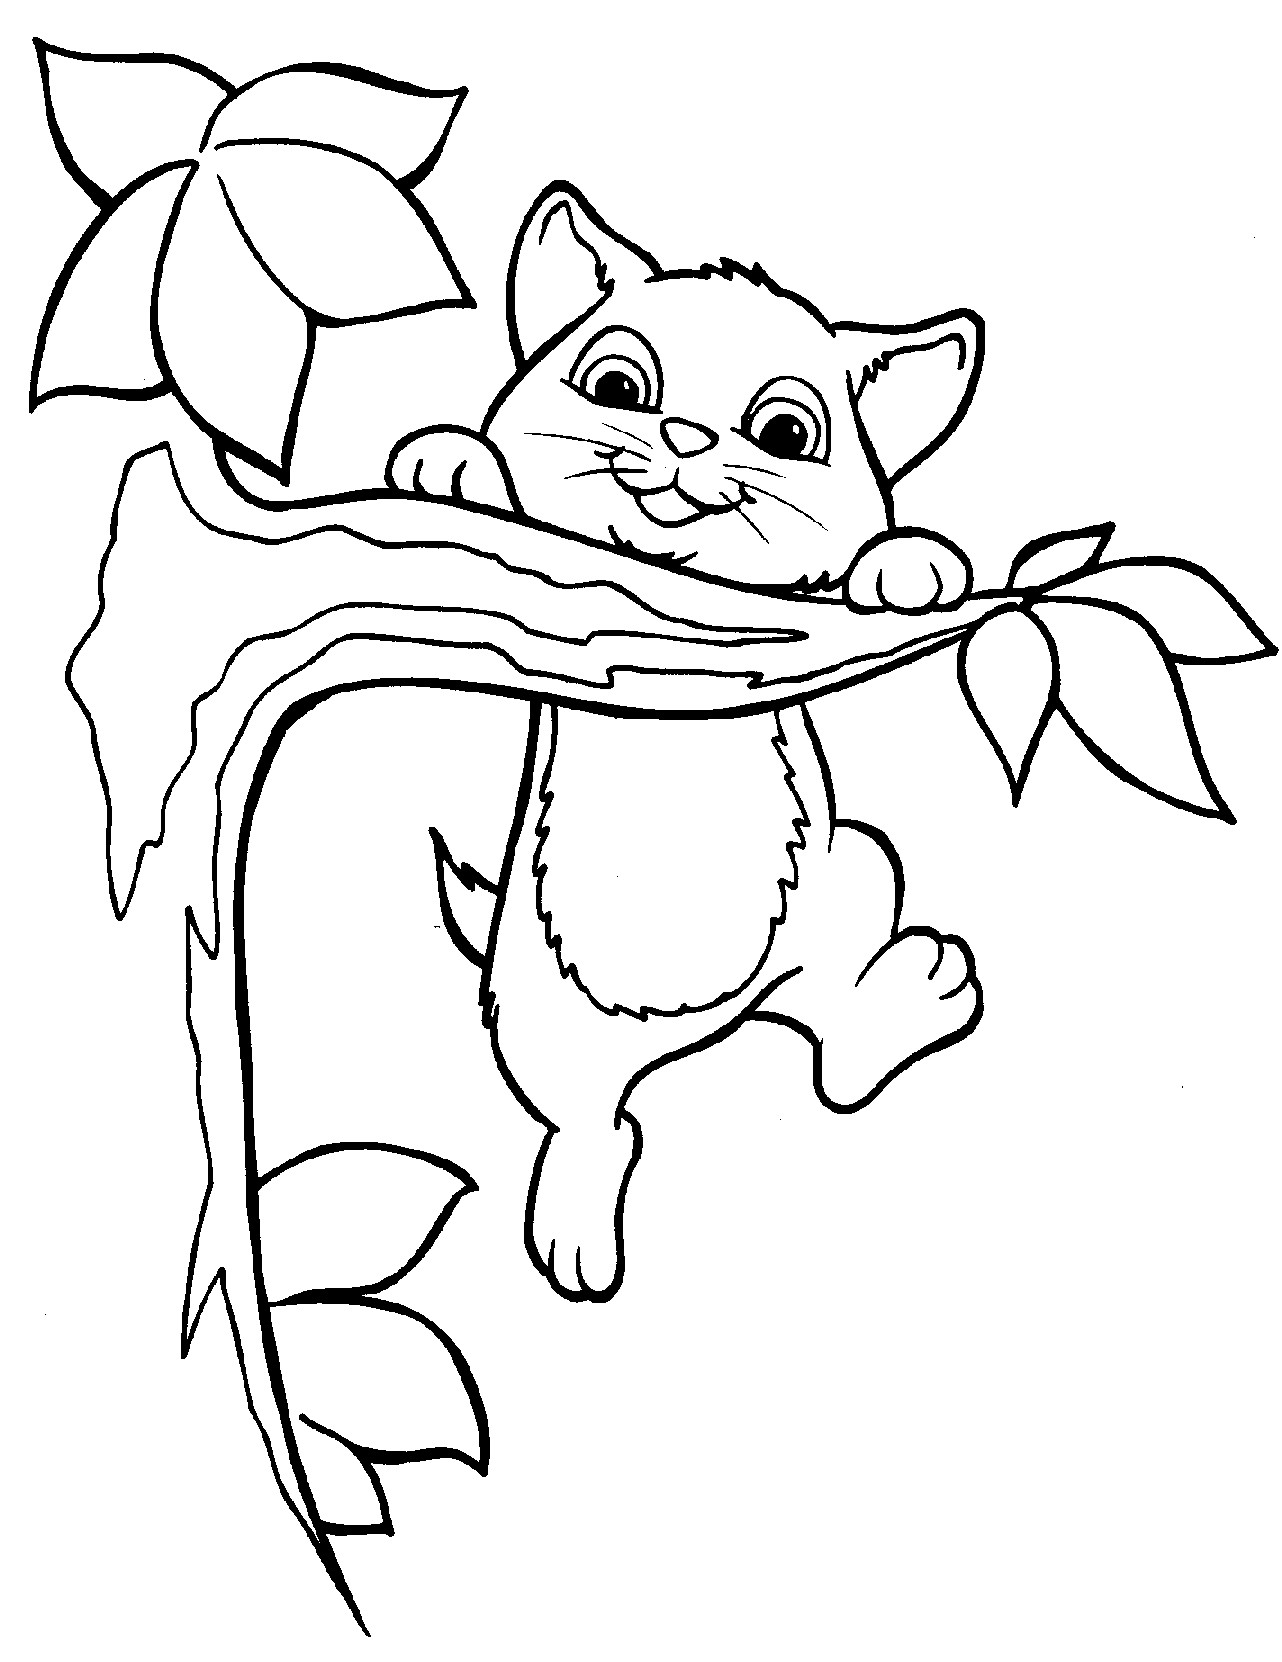 Kids Coloring Pages Cats
 Free Printable Kitten Coloring Pages For Kids Best